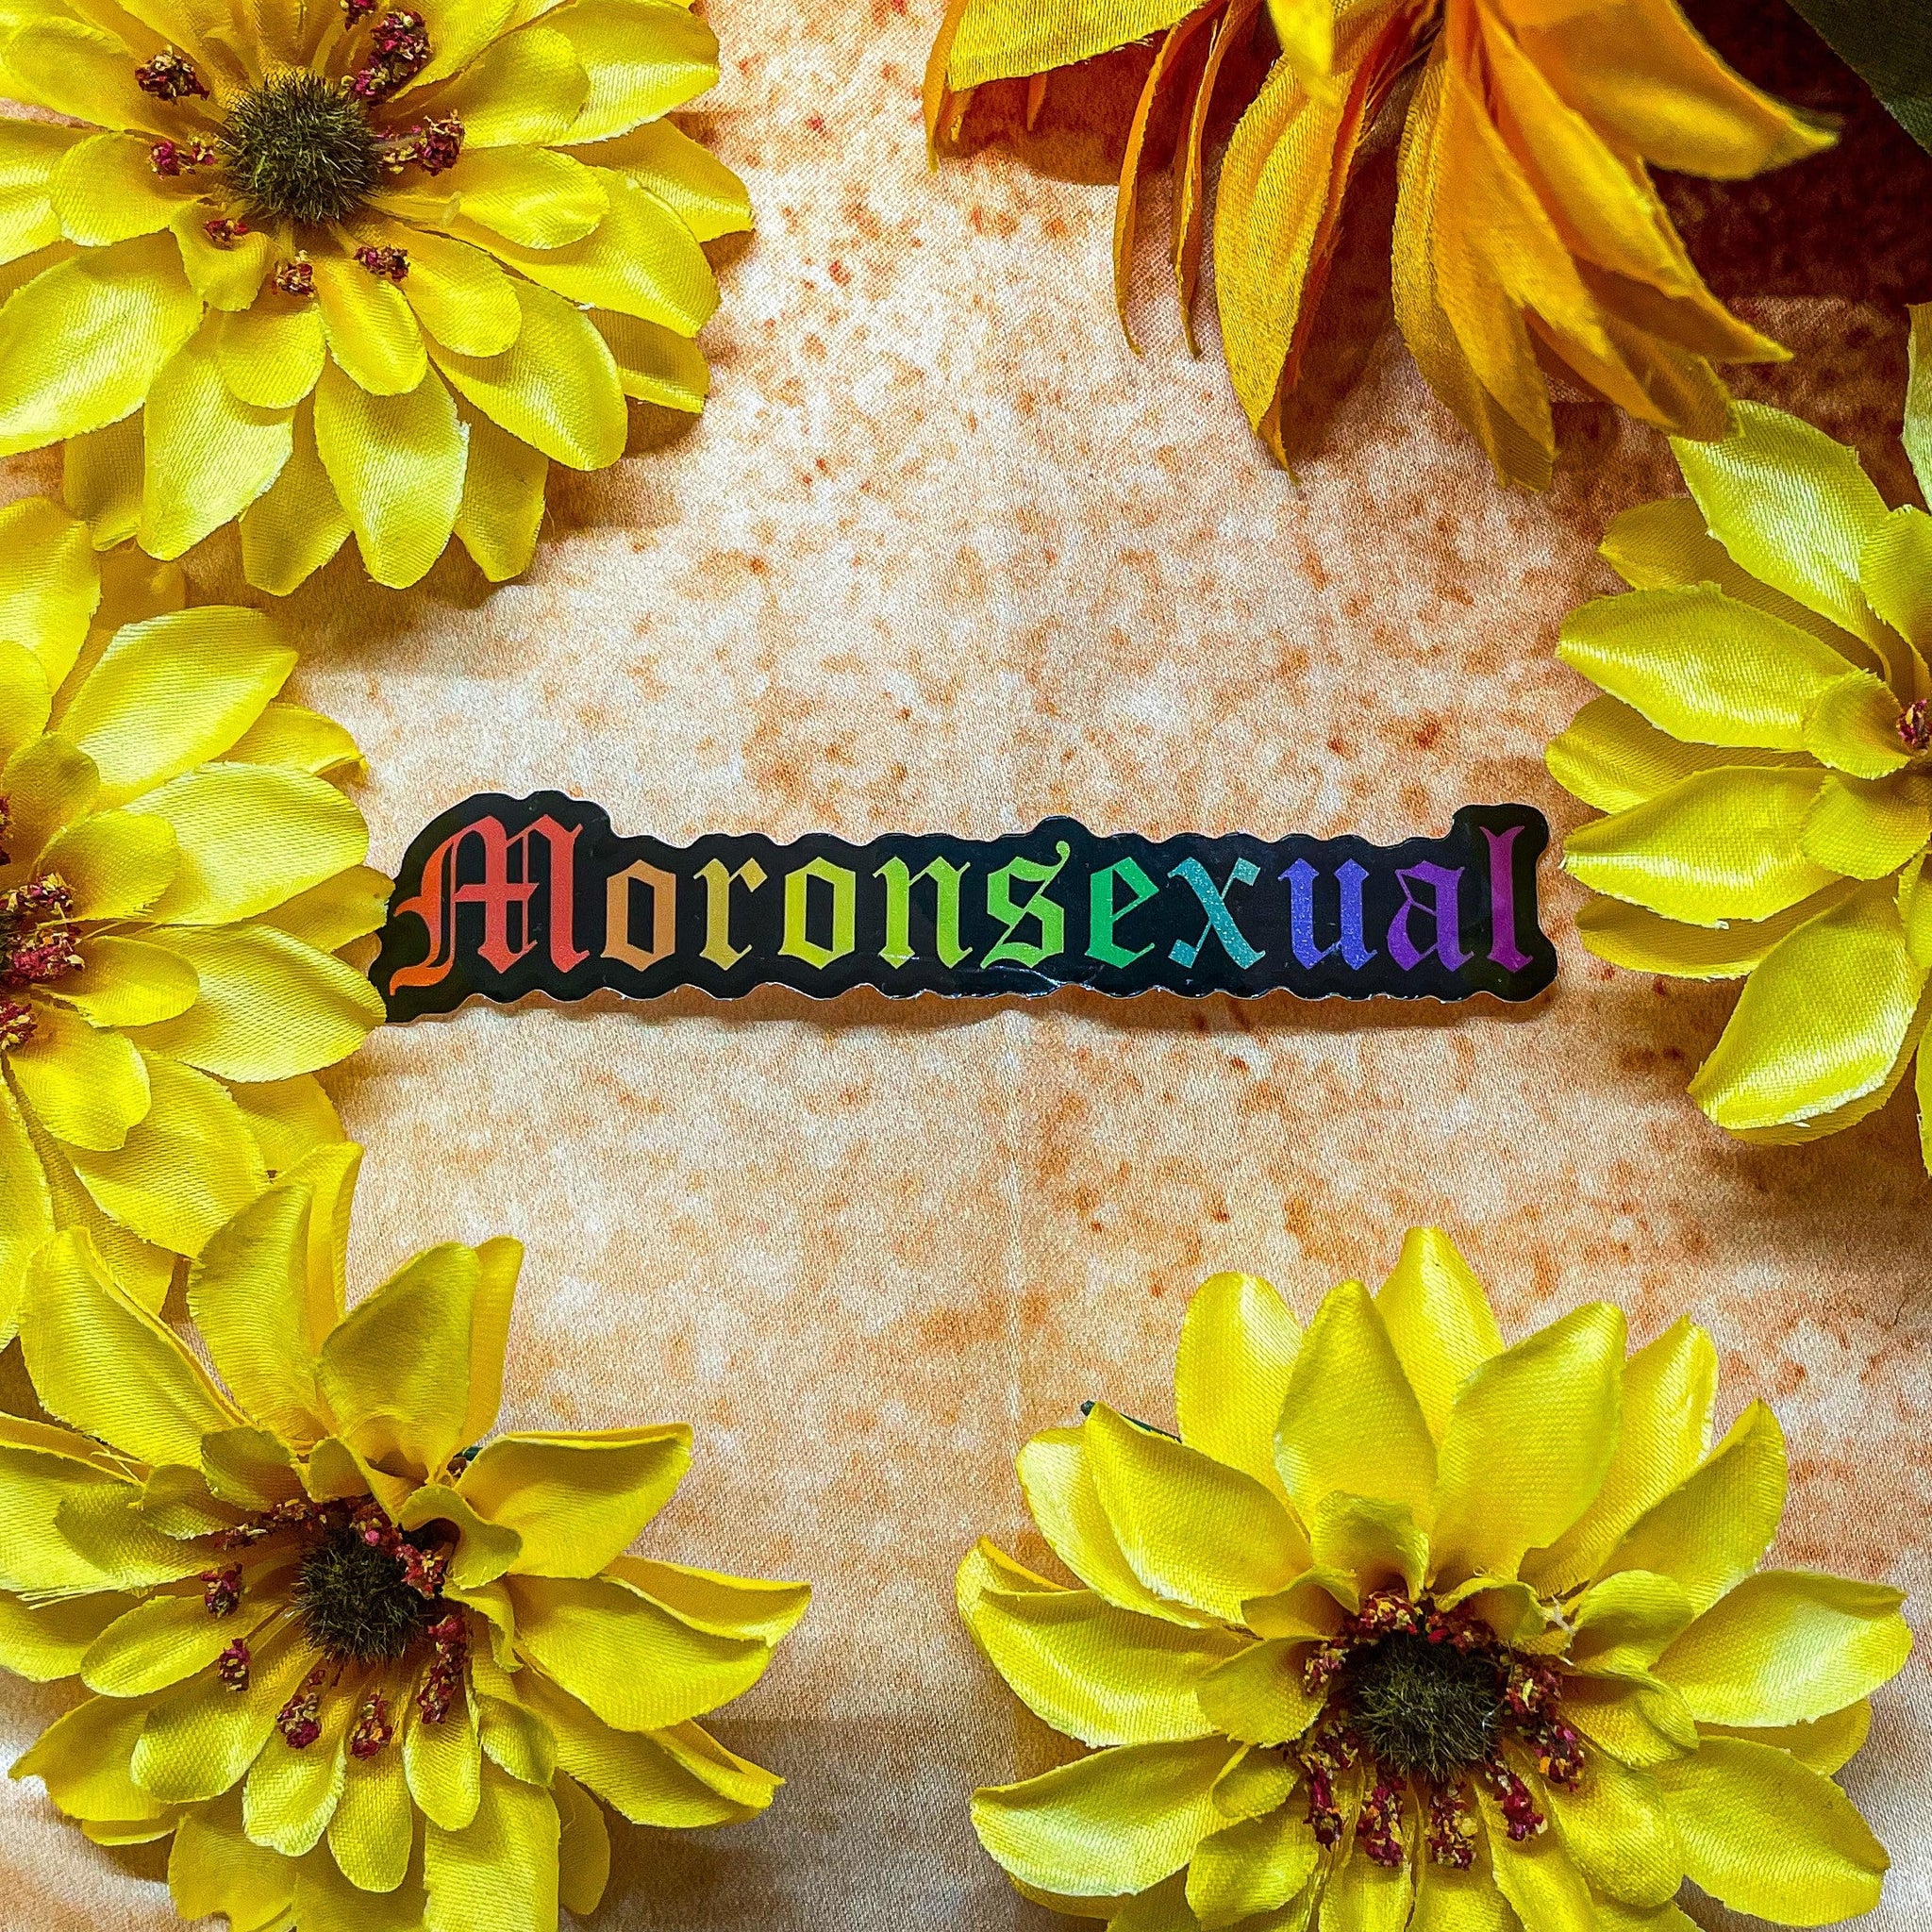 Moronsexual Holographic Sticker 4”